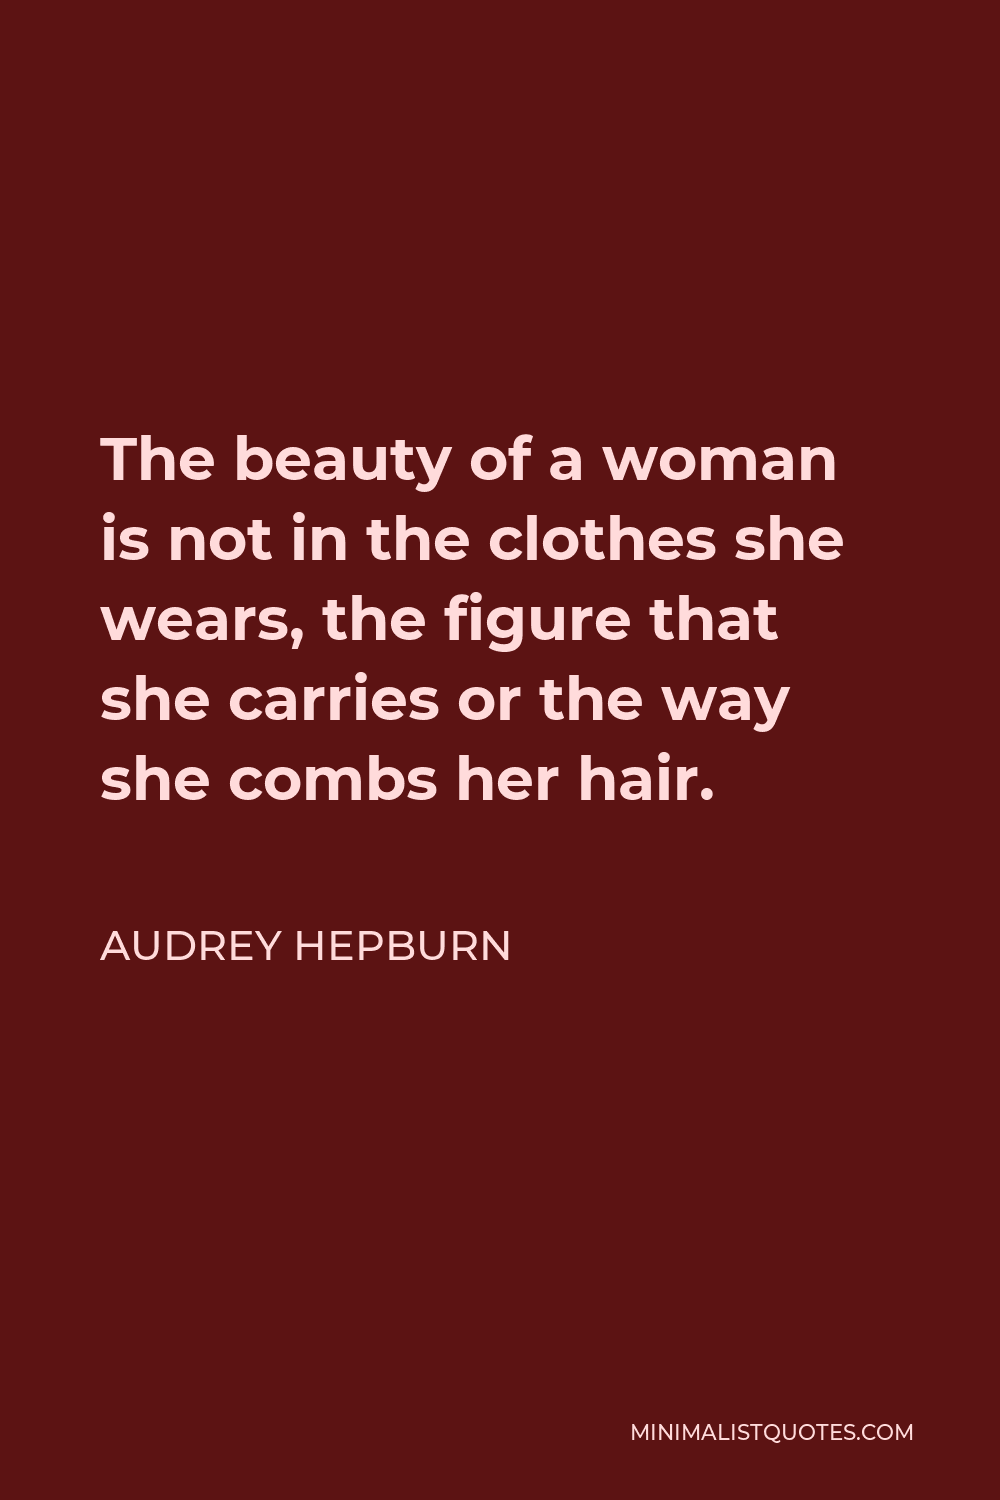 Audrey Hepburn Quote: The beauty of a woman is not in the clothes she ...